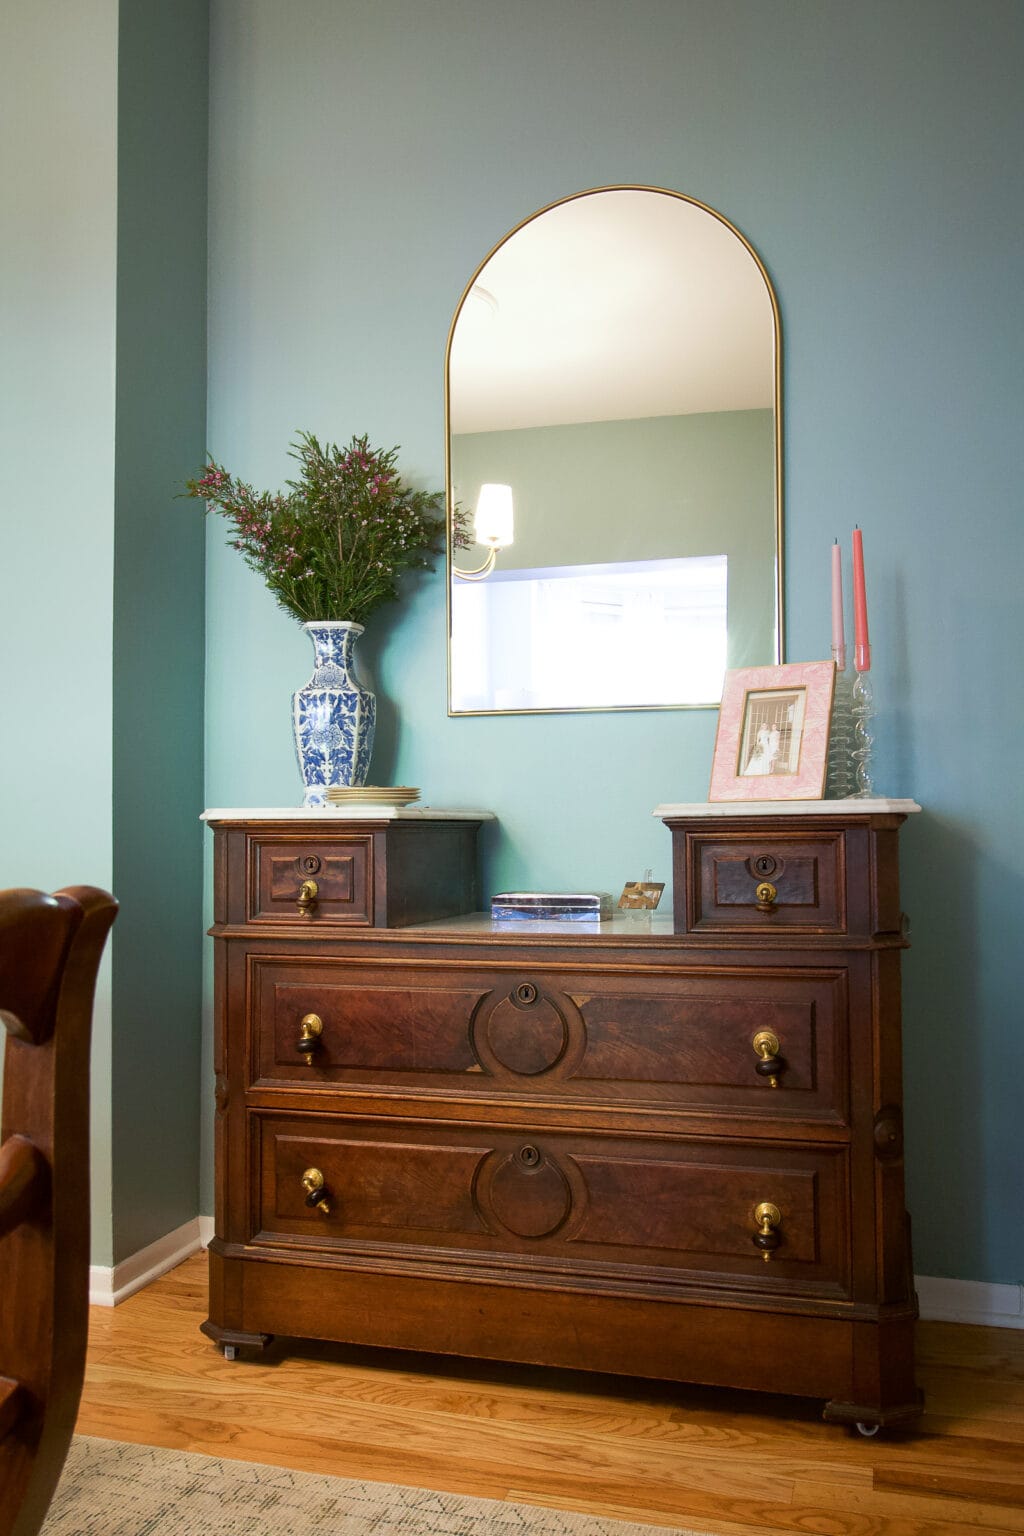 An antique dresser in a dining room 